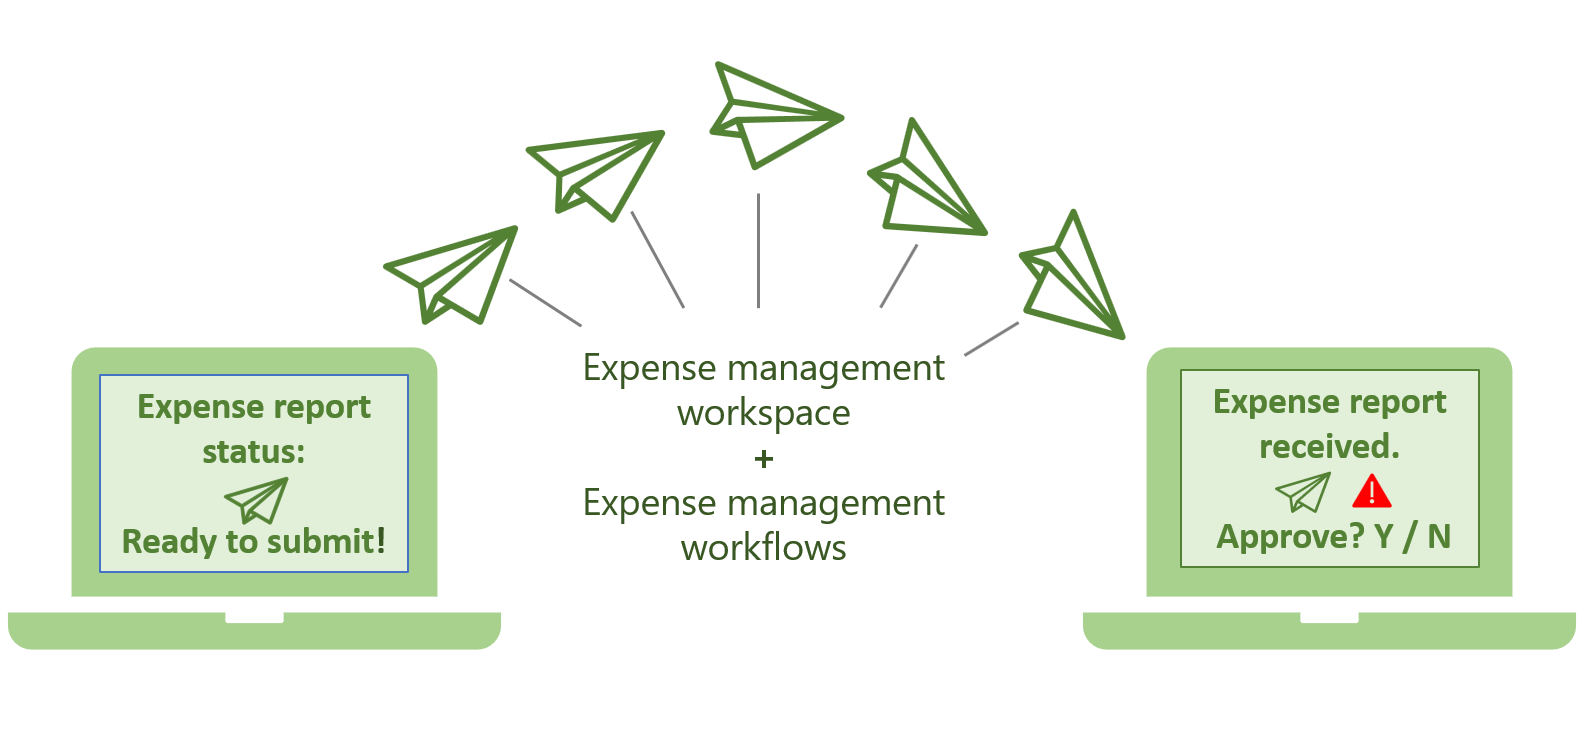  Graphic showing the Expense managemnt workflow.